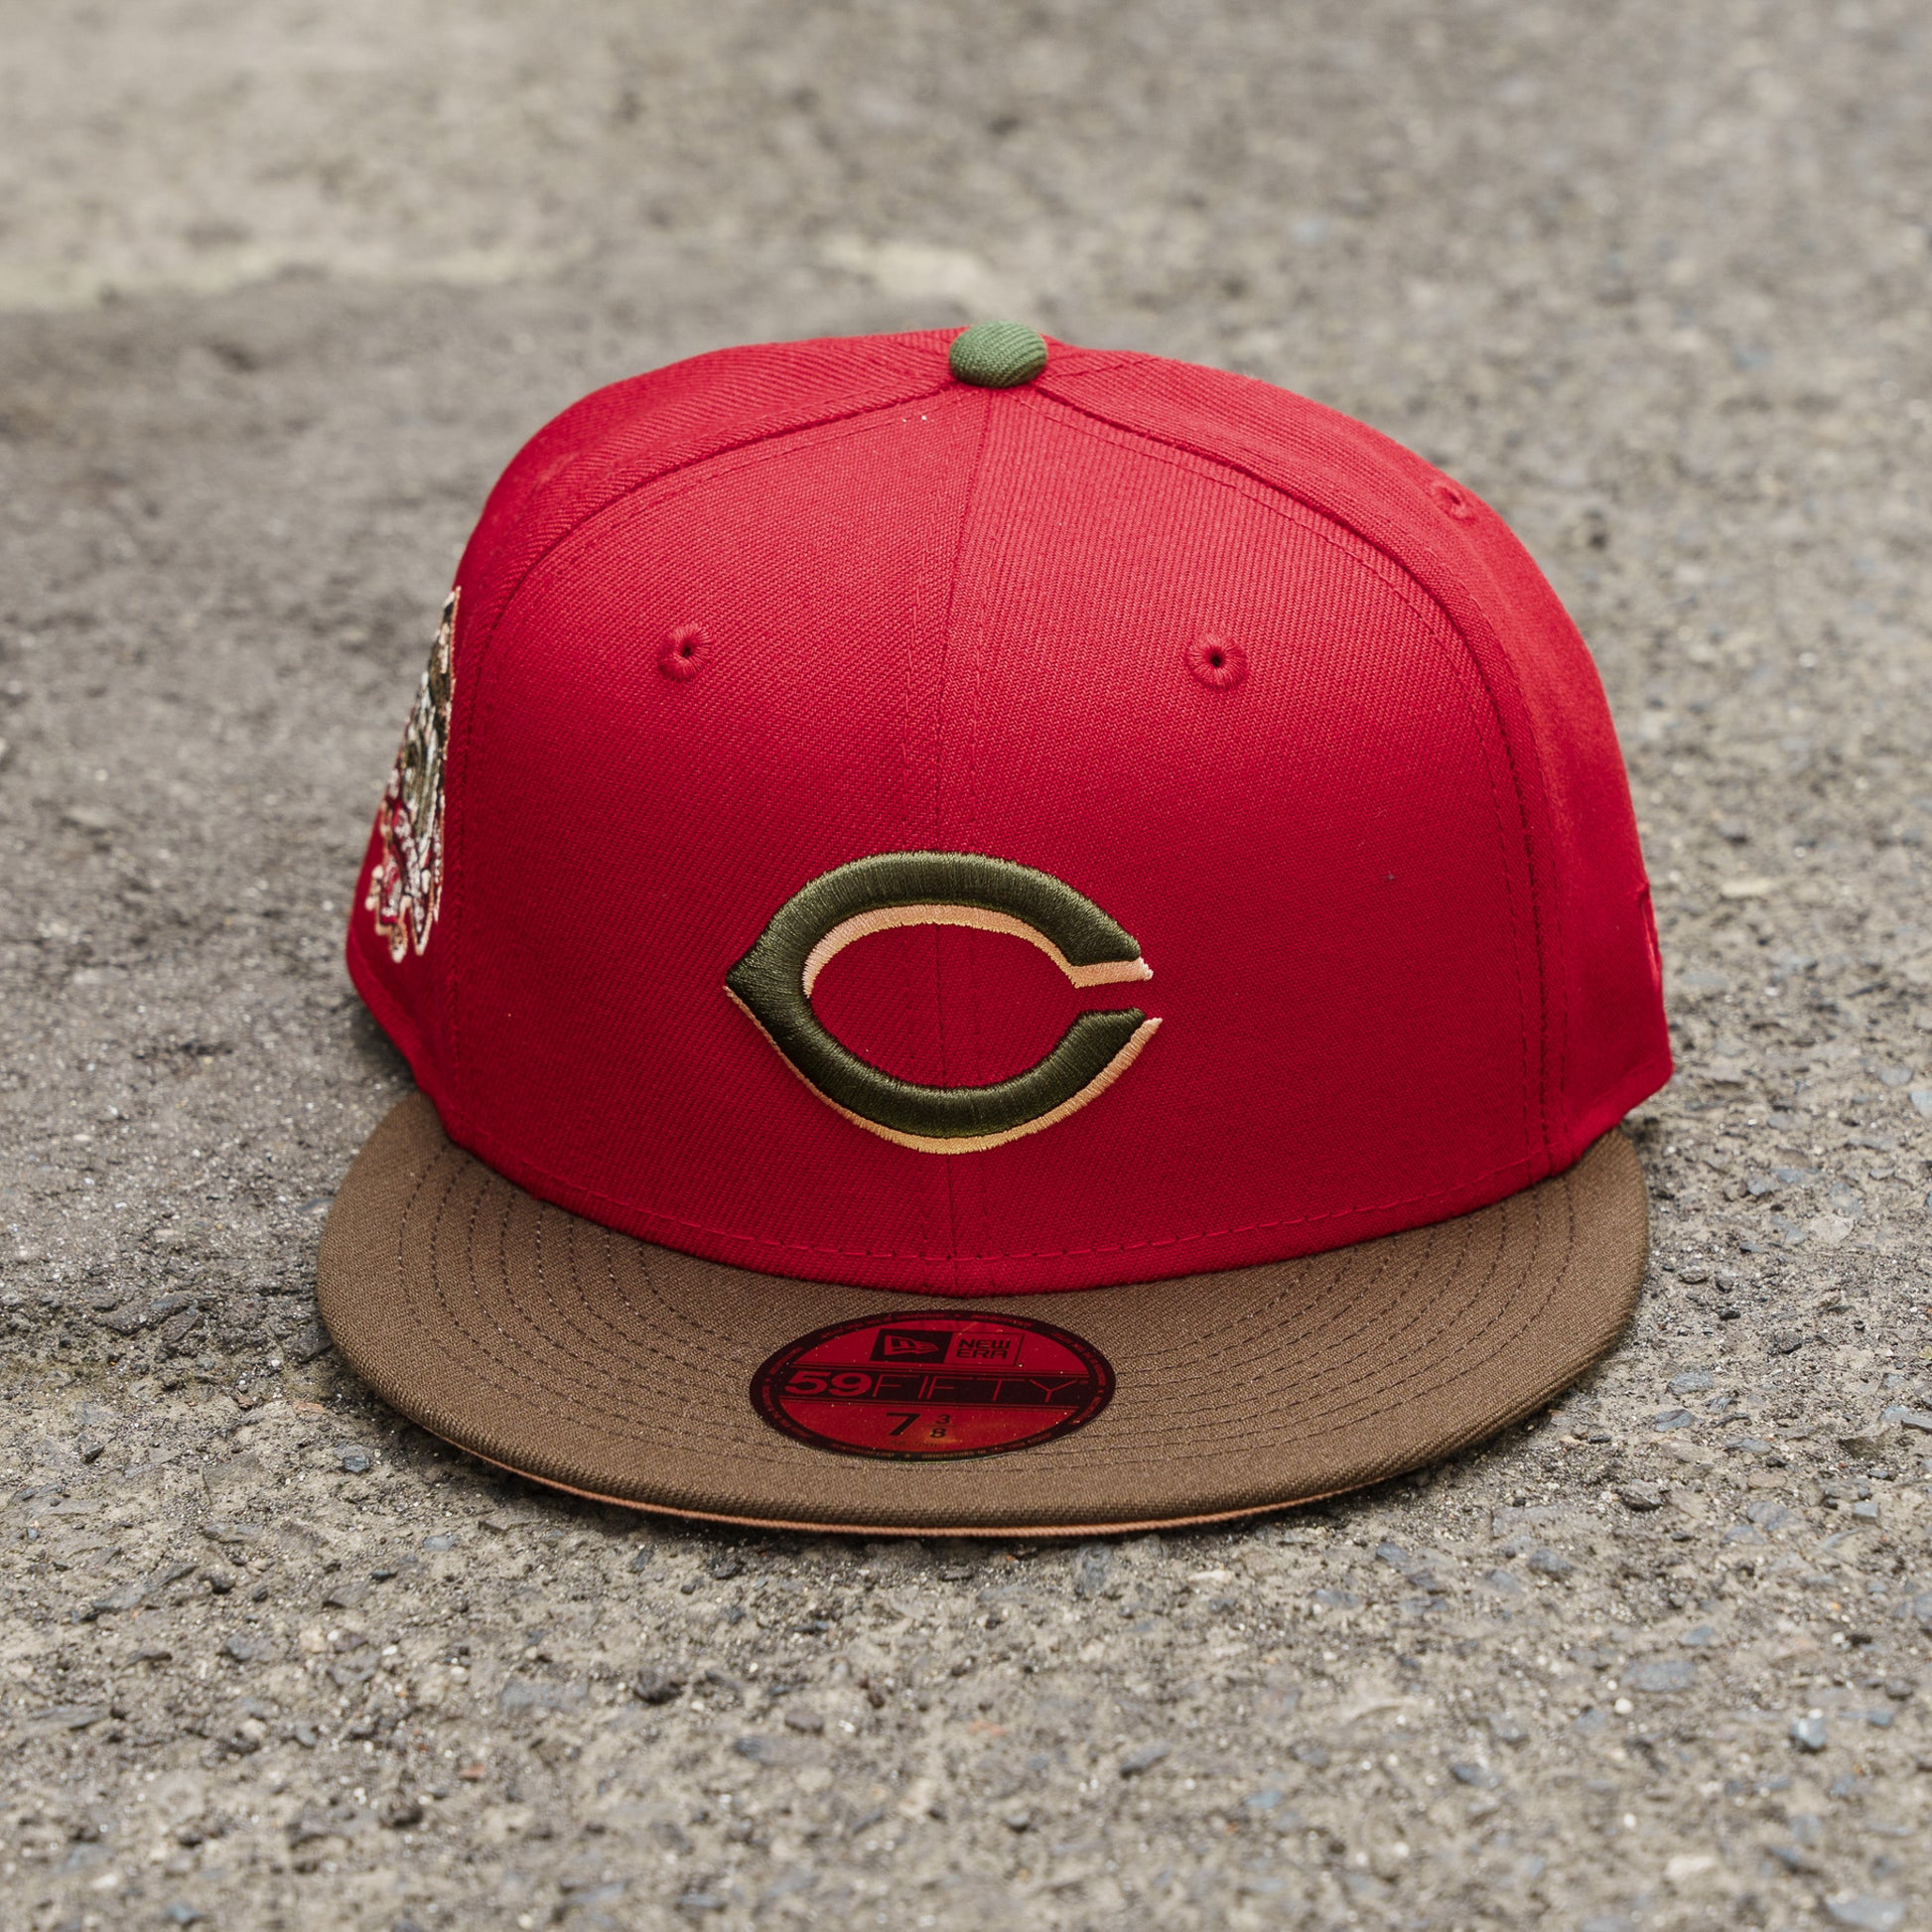 Cincinnati Reds New Era Sidepatch 59FIFTY Fitted Hat - Red